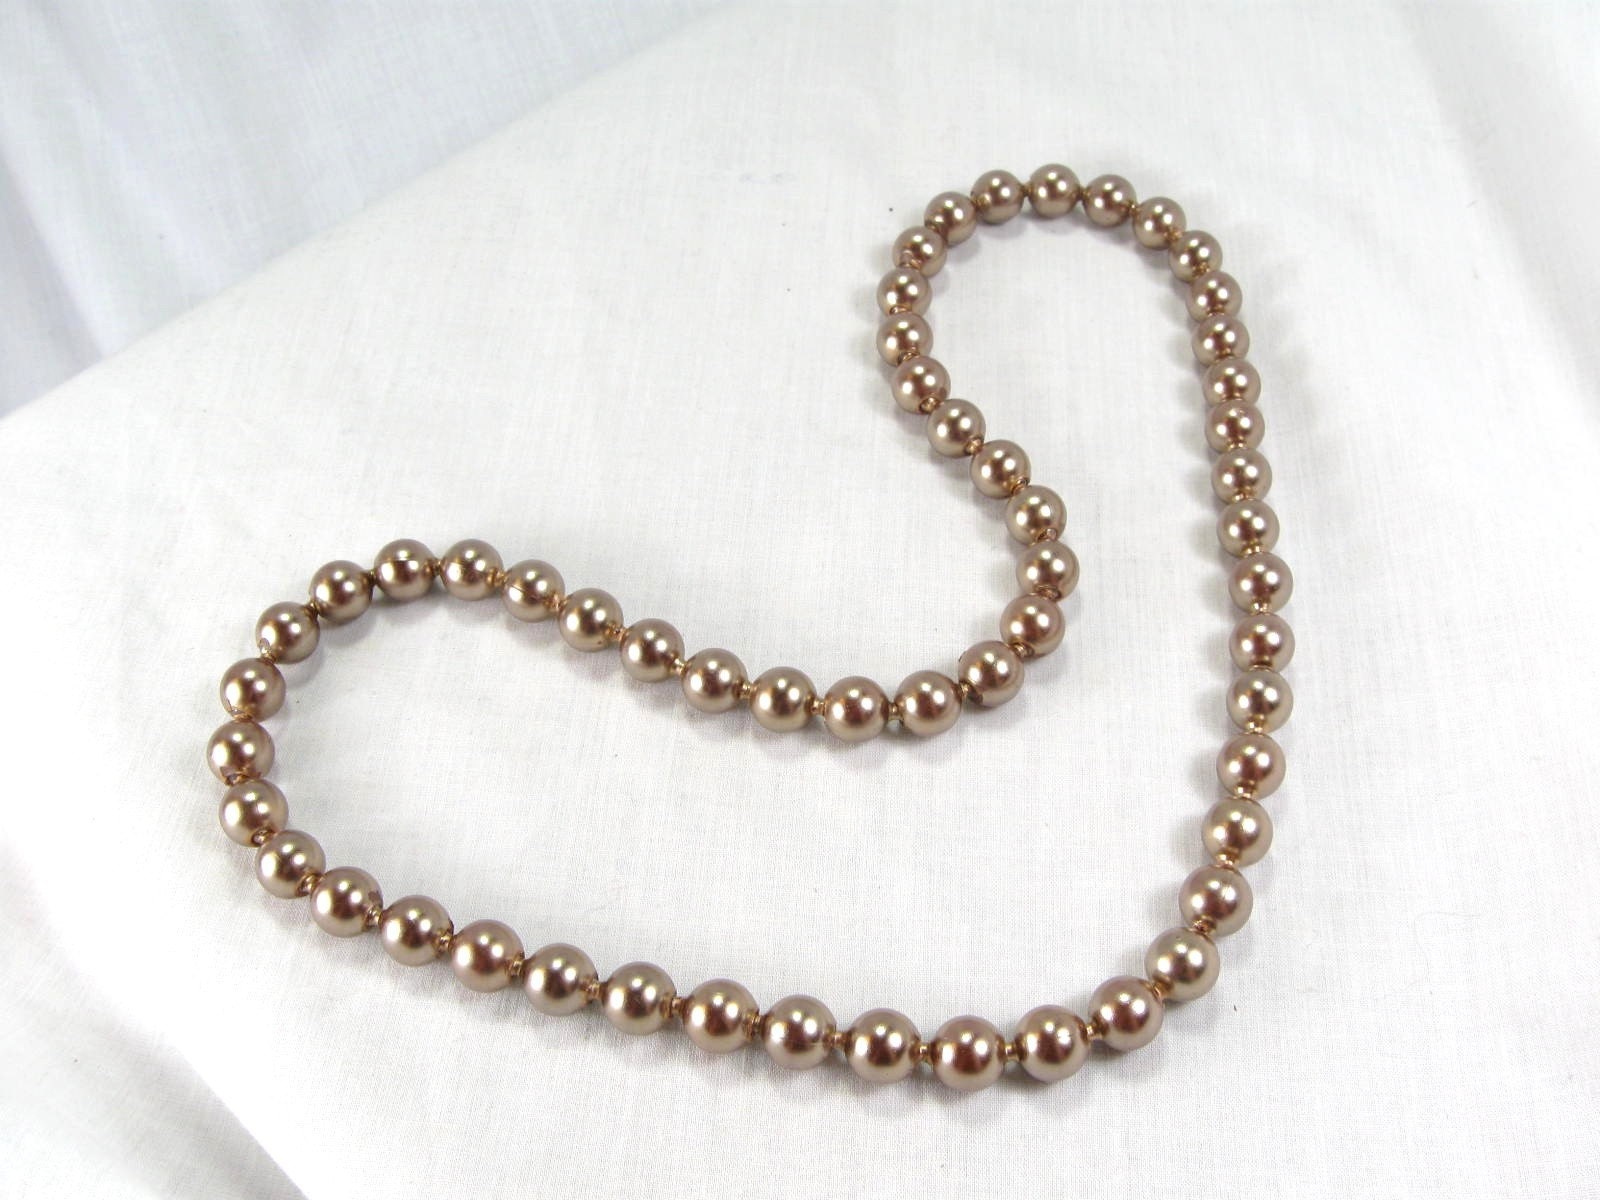 Vintage 60s Plastic Pop Faux Pearl Bead Necklace Jewelry